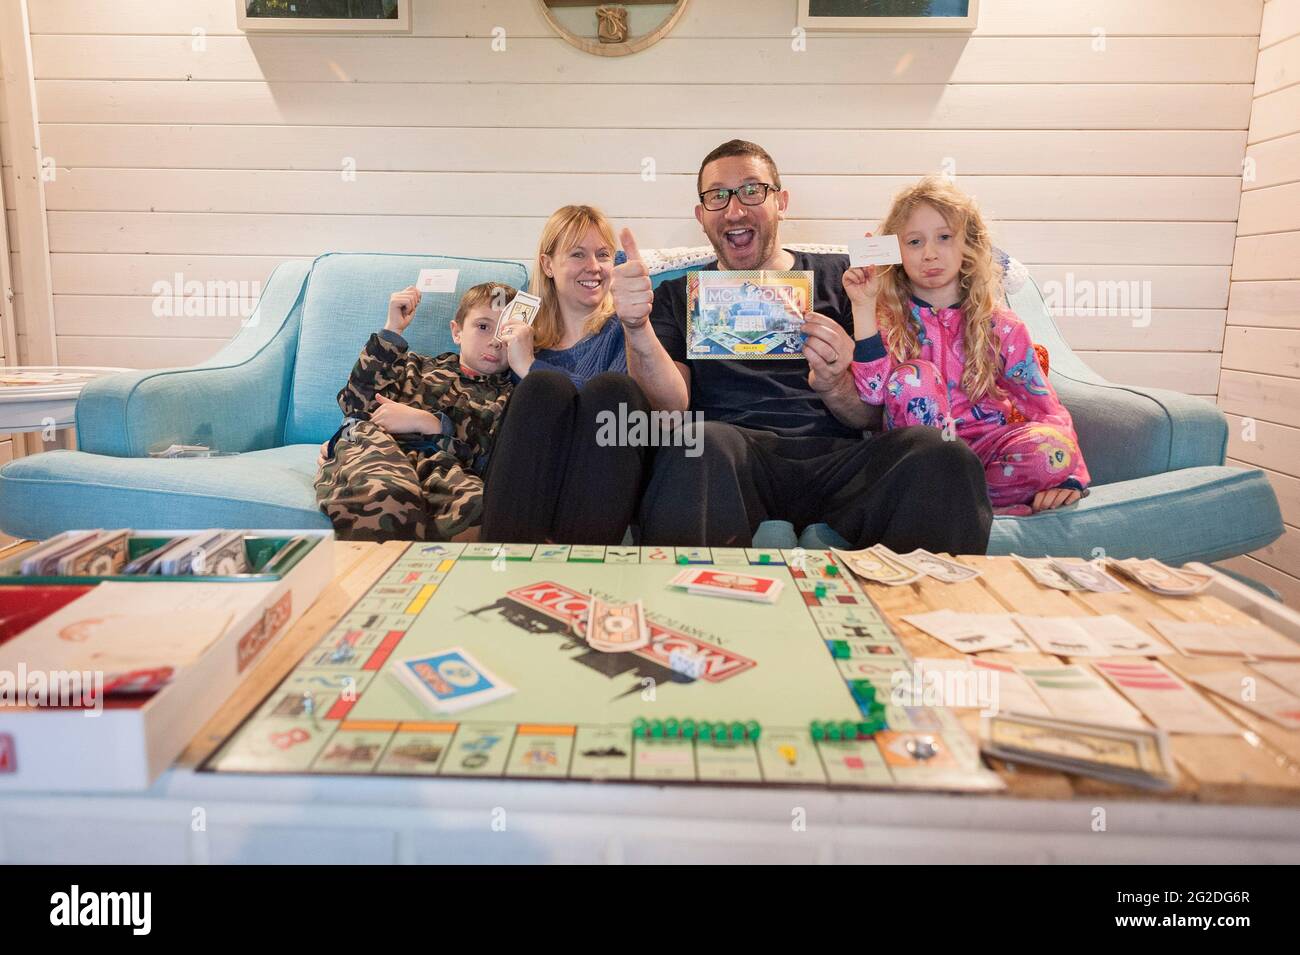 A family playing a traditional board game of Monopoly Stock Photo